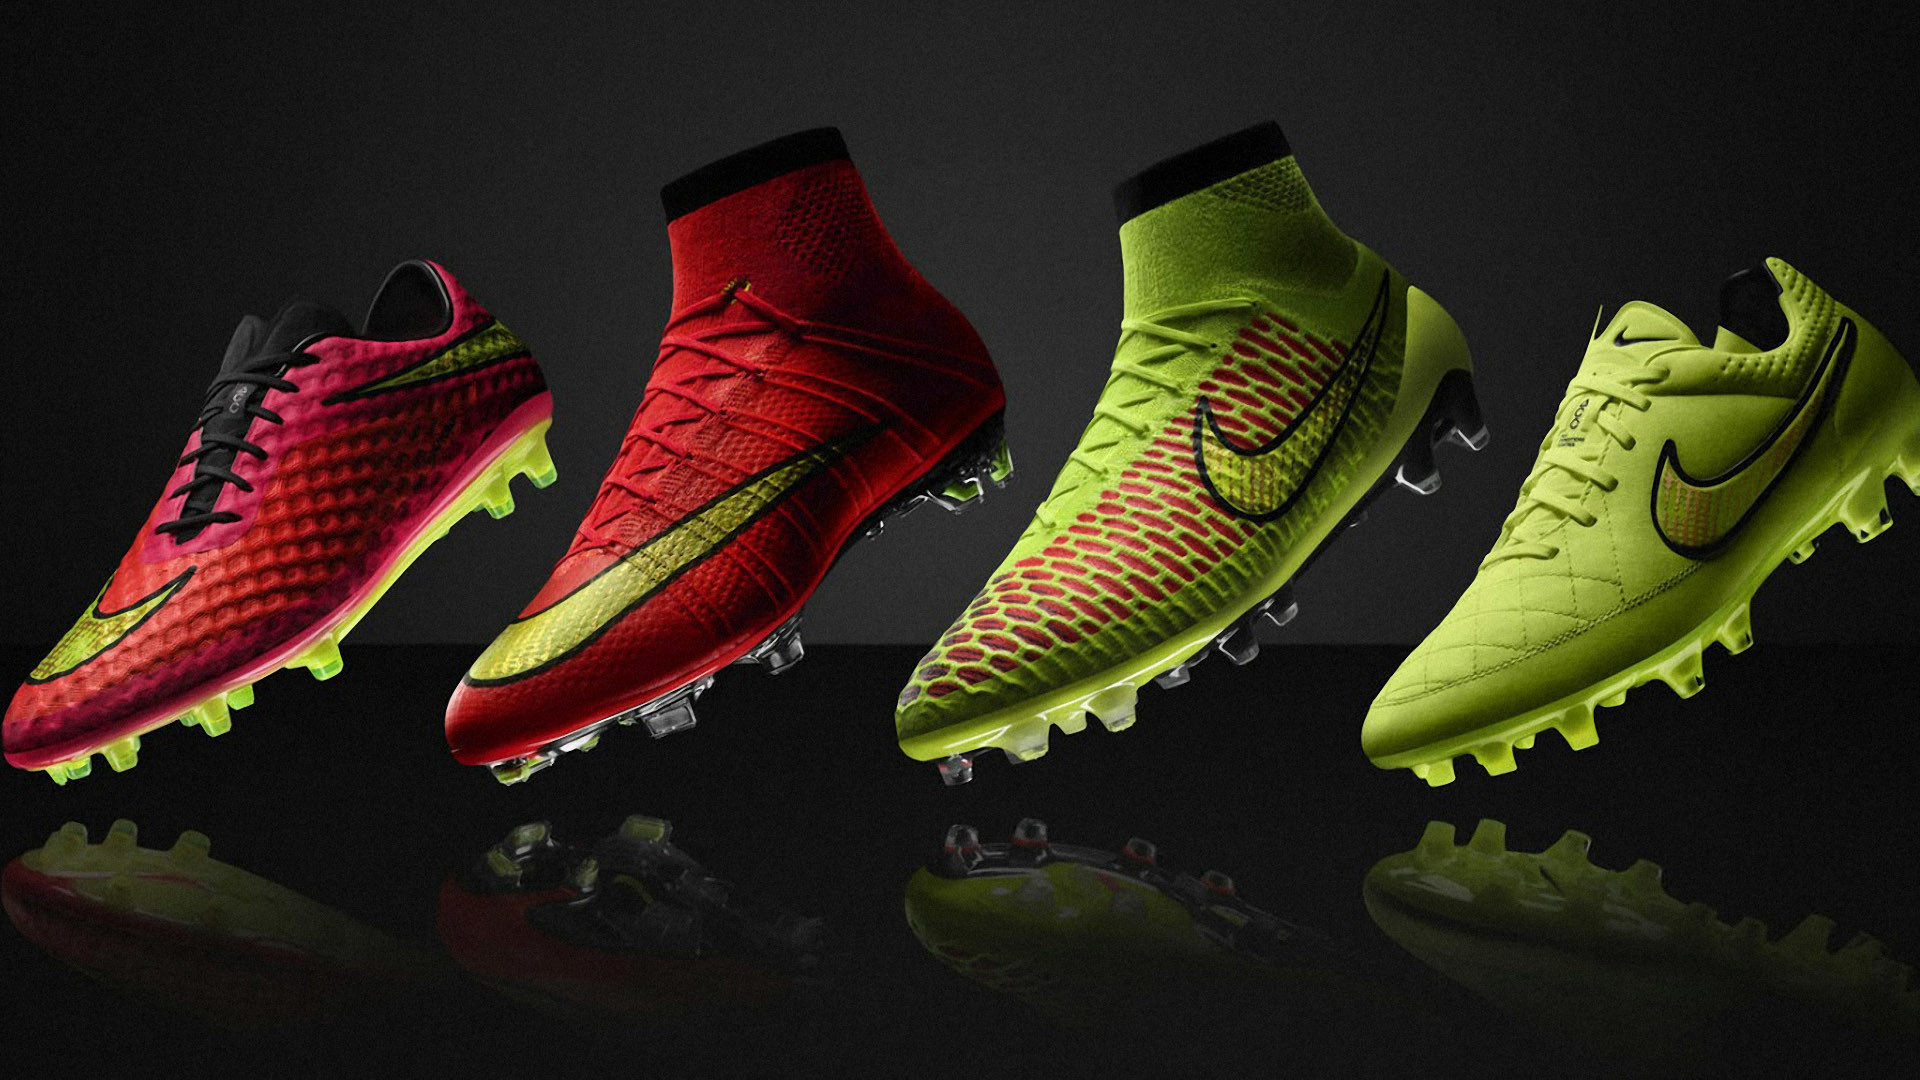 1920x1080 Nike Soccer HD Wallpapers - Free download latest Nike Soccer HD Wallpapers  for Computer, Mobile